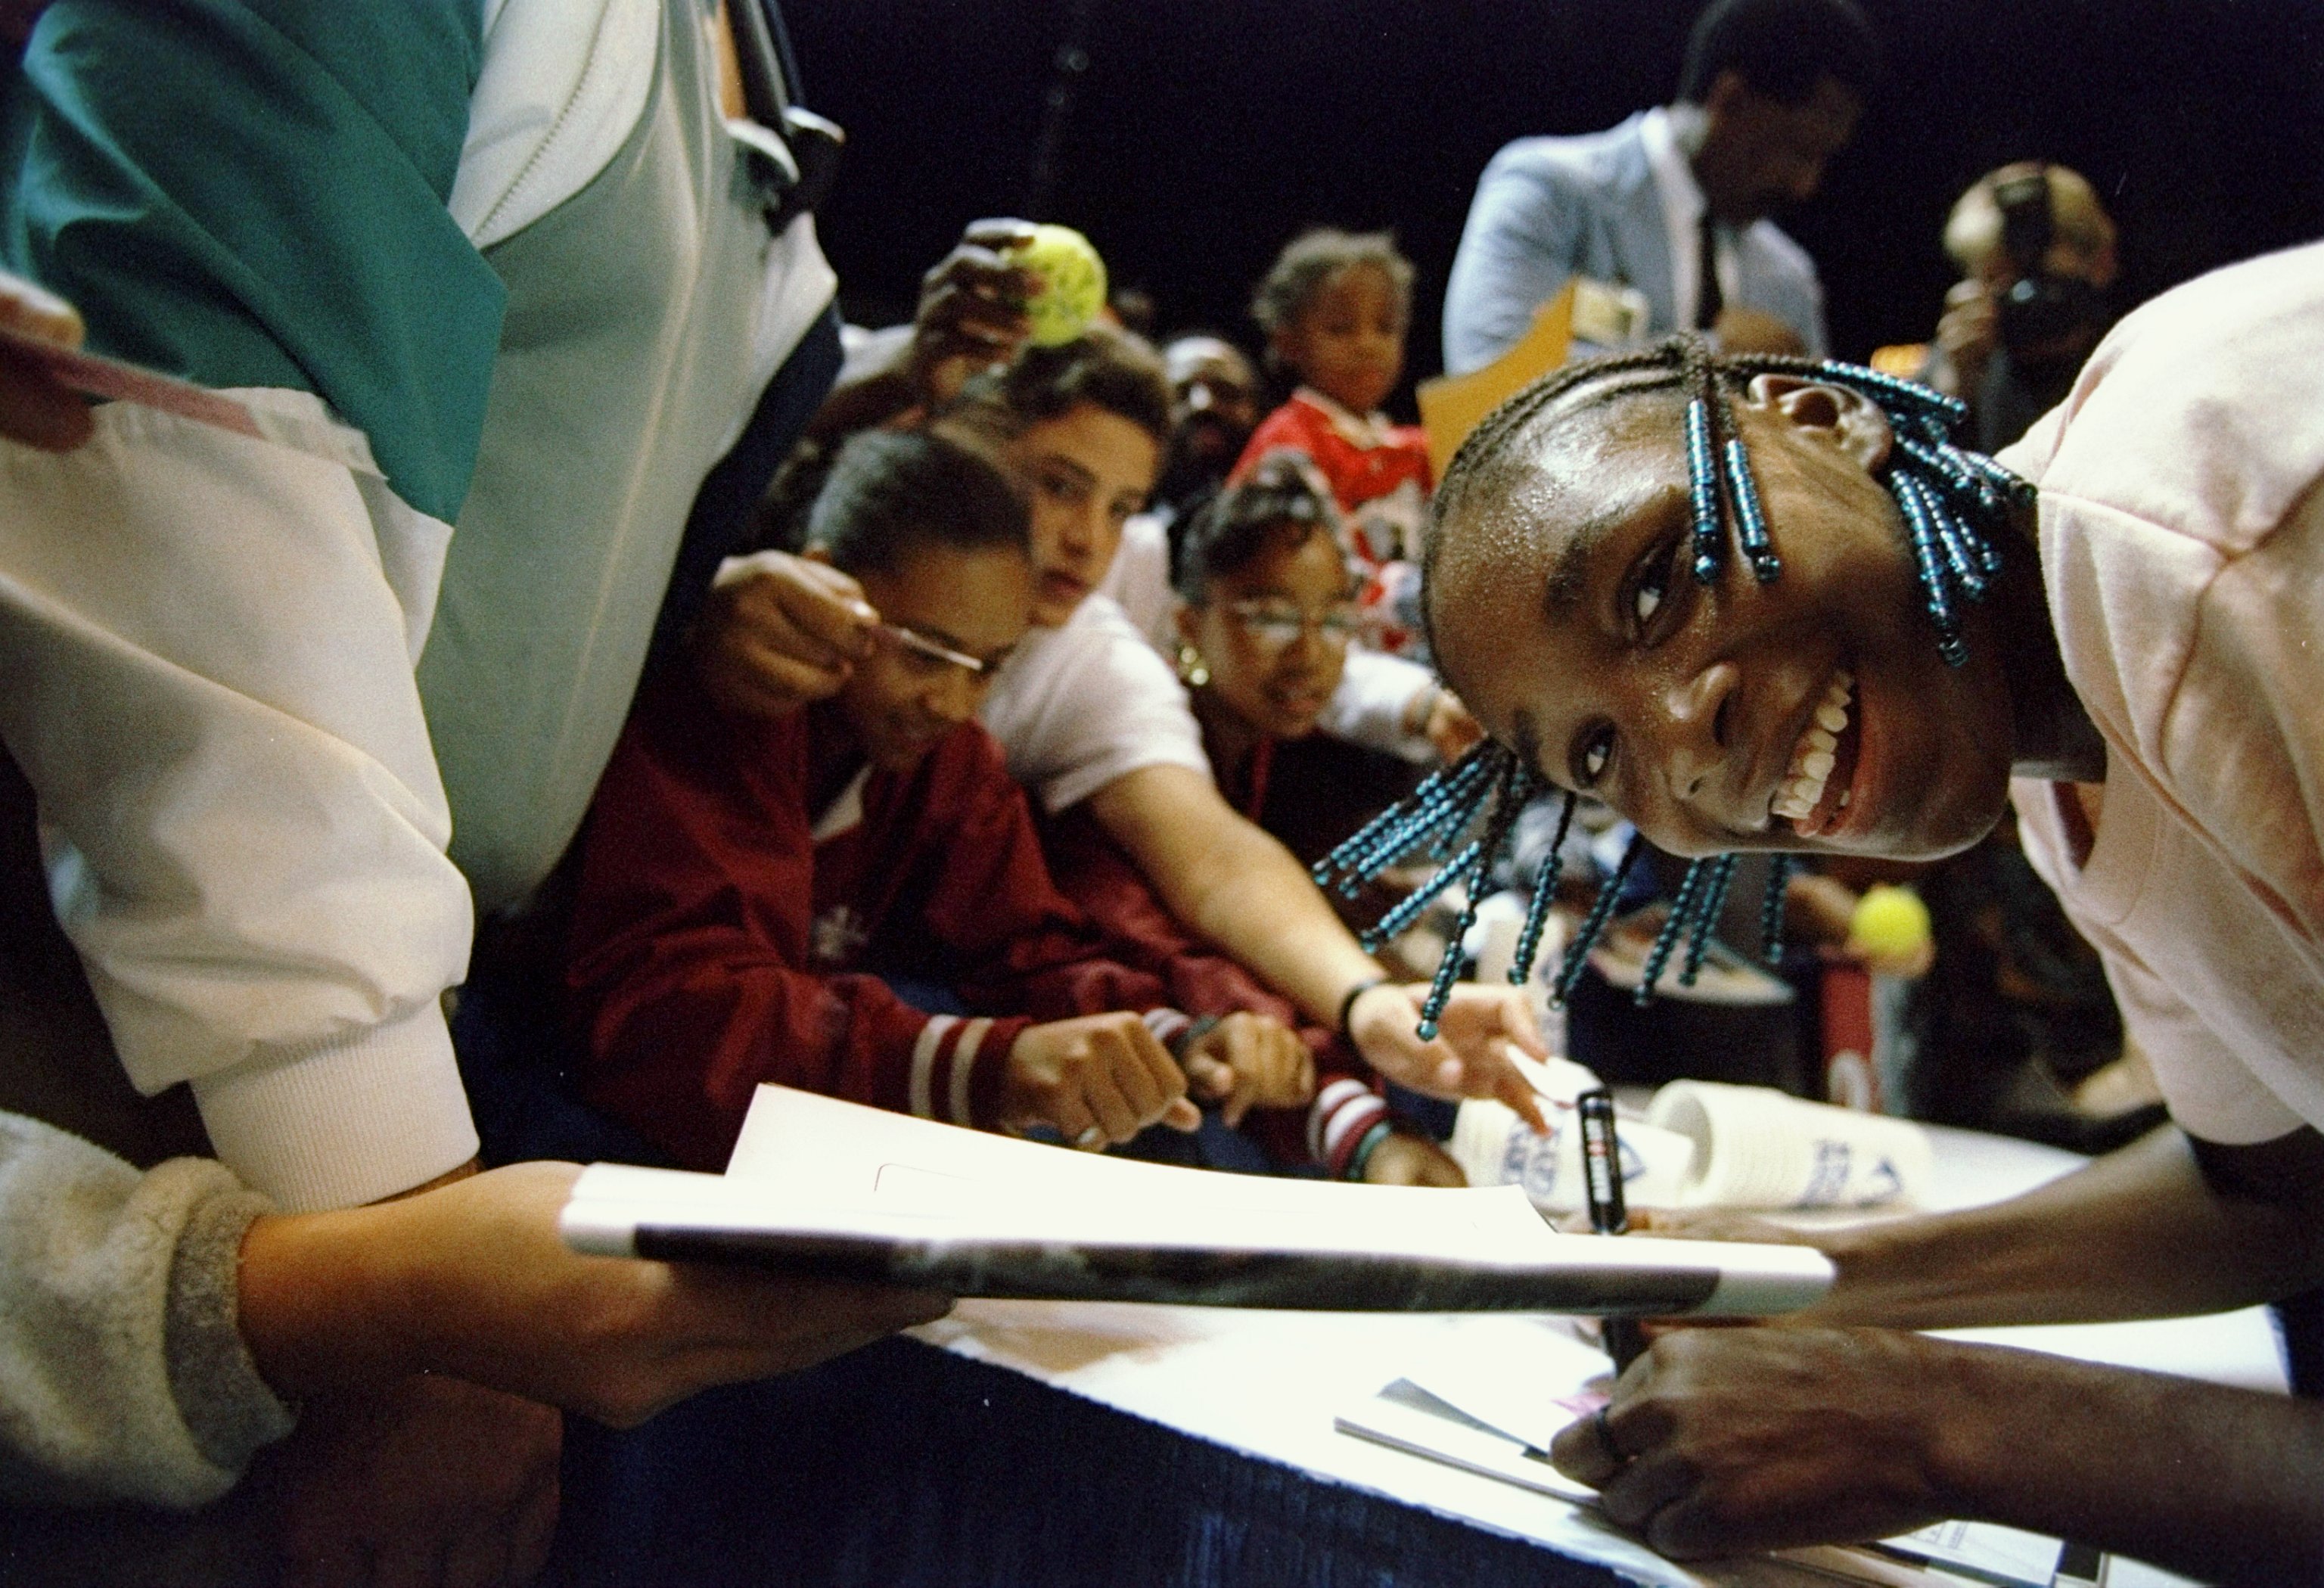 Venus Williams Competing at the Bank of the West Classic in 1994